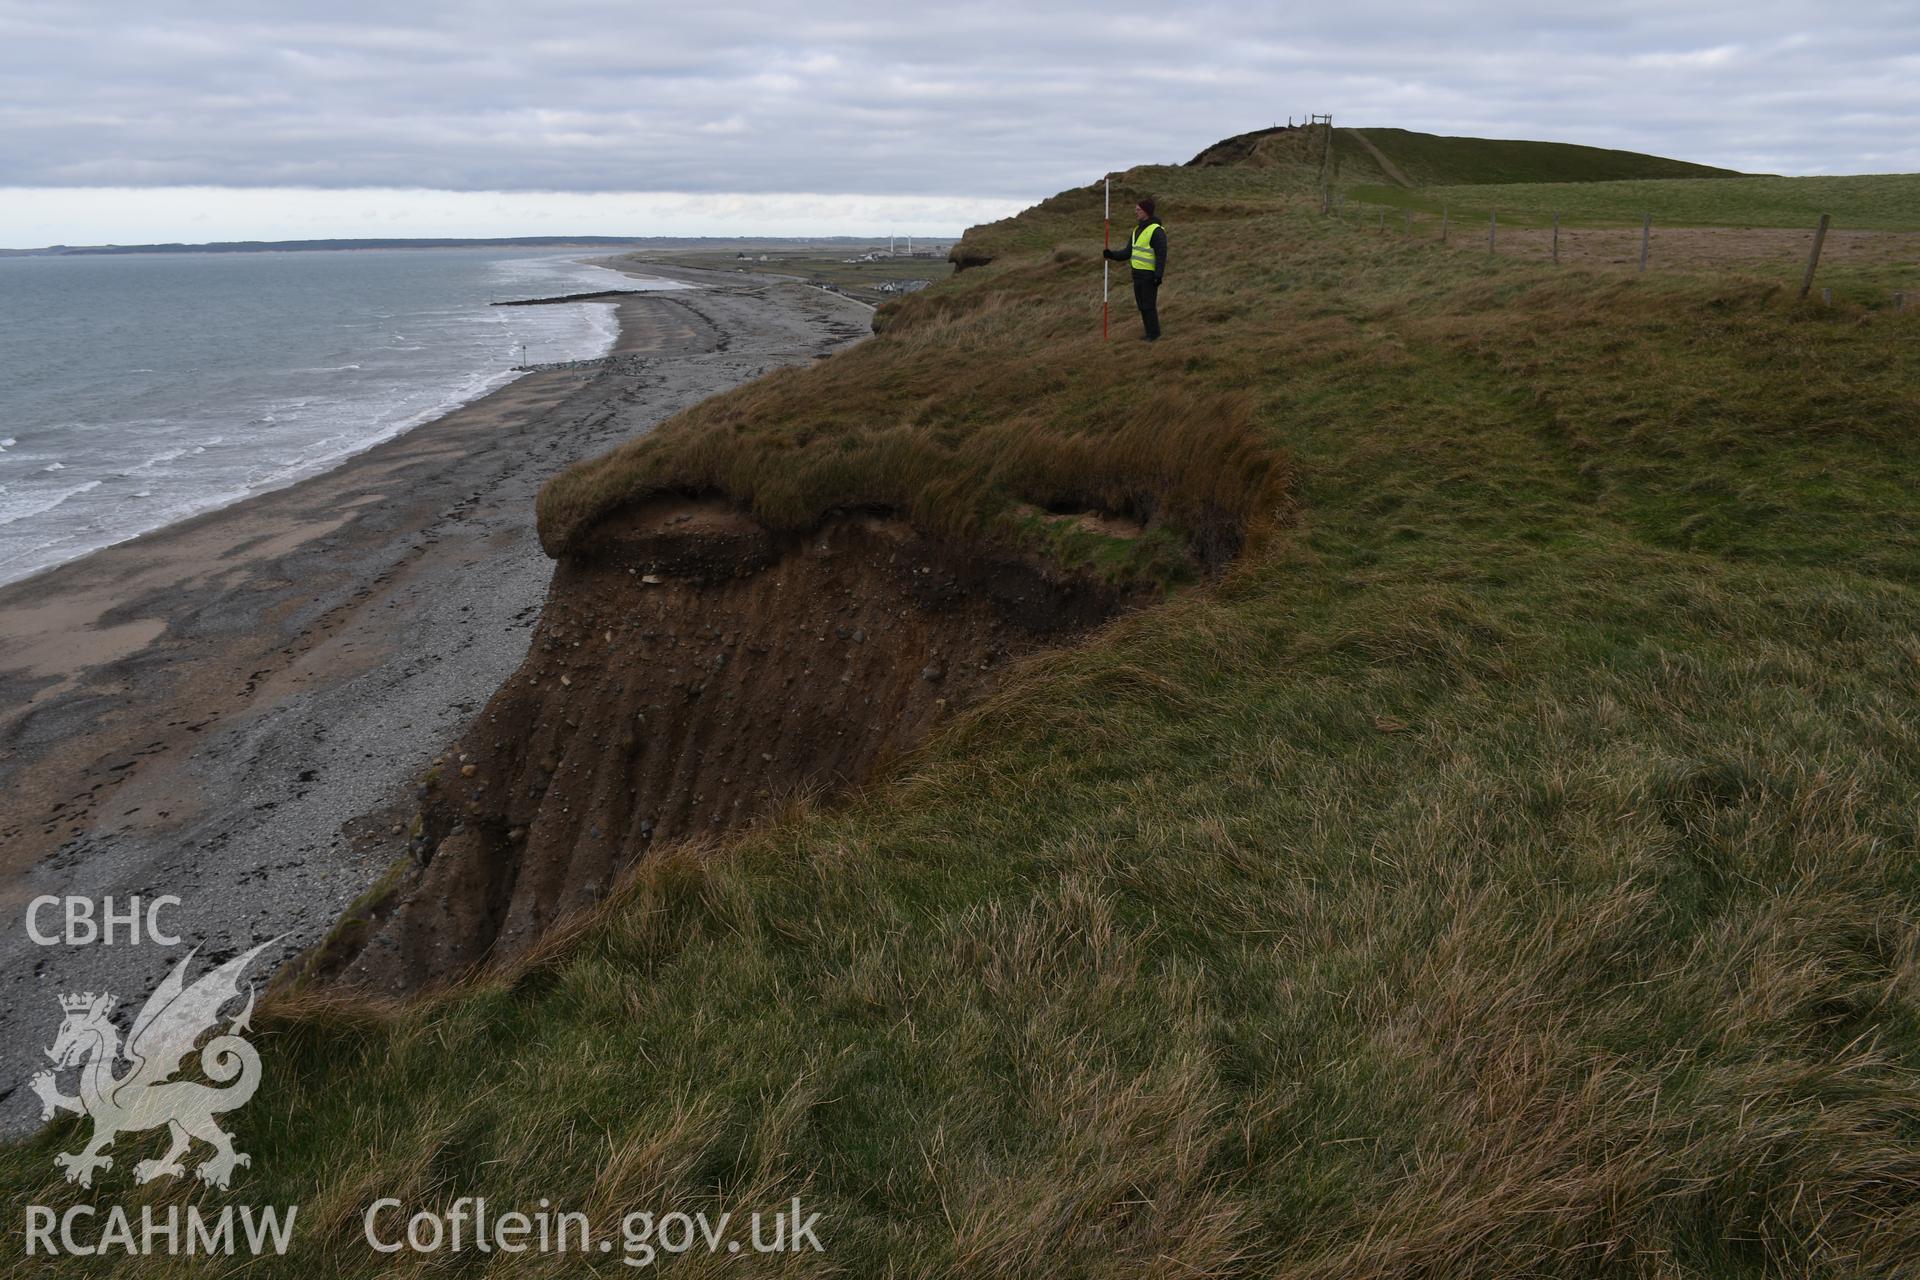 Looking north along eroding coast. Figure and 2m scale. Taken by Hannah Genders Boyd. Produced with EU funds through the Ireland Wales Co-operation Programme 2014-2023. All material made freely available through the Open Government Licence.